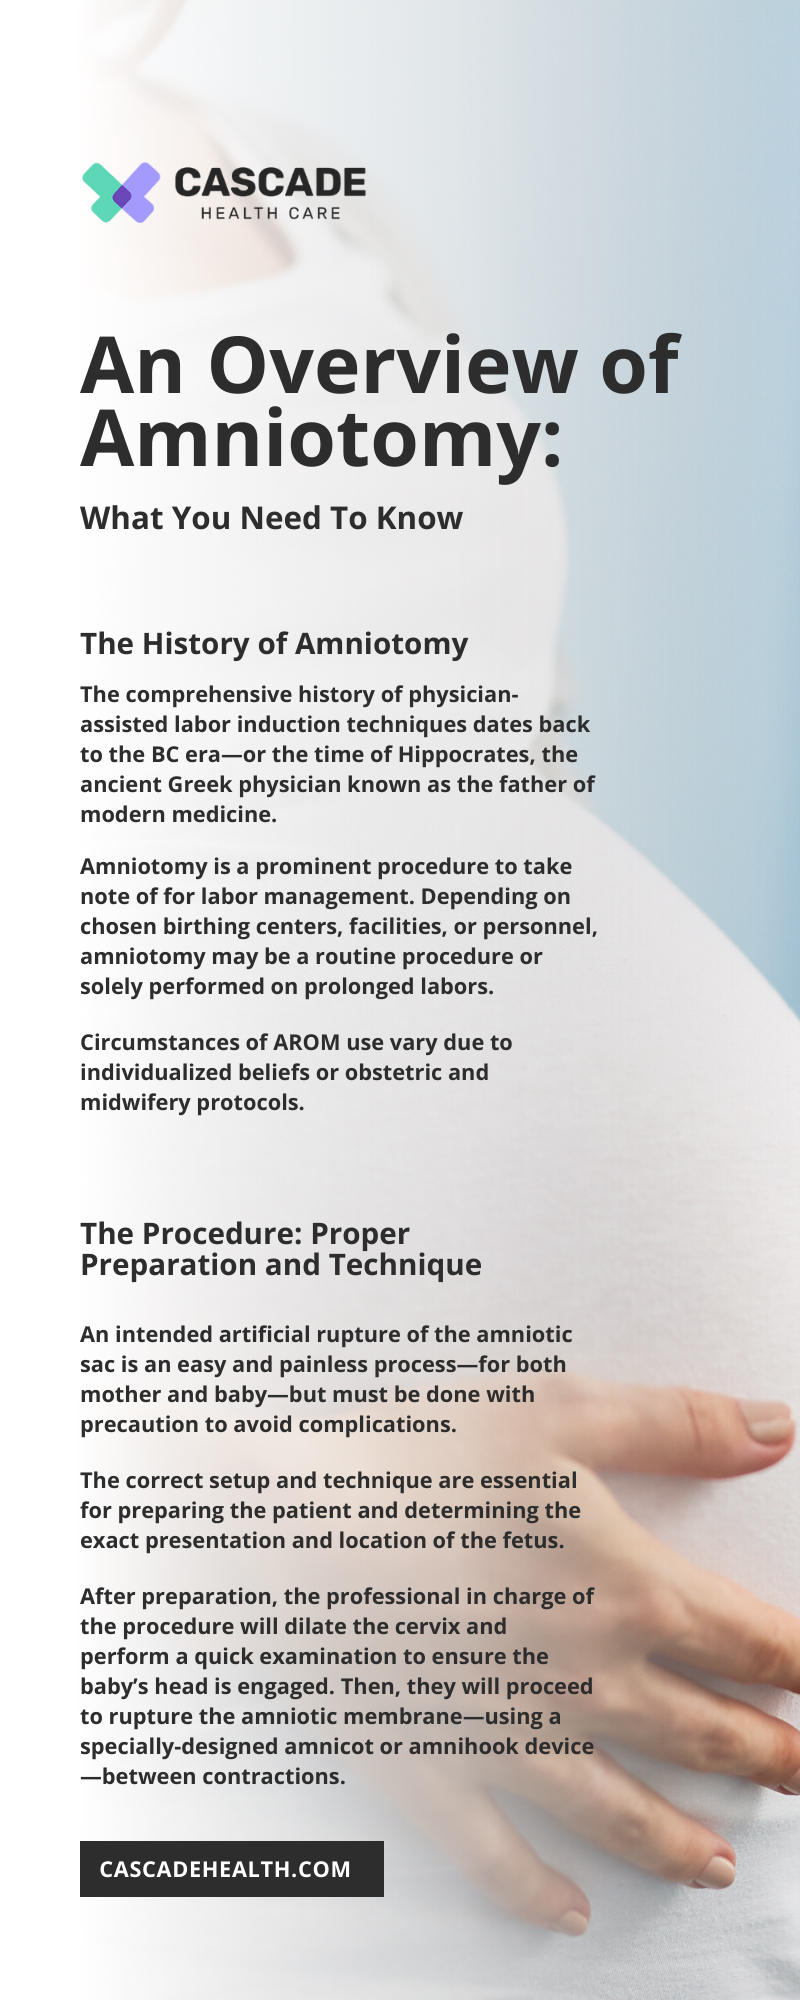 An Overview of Amniotomy: What You Need To Know